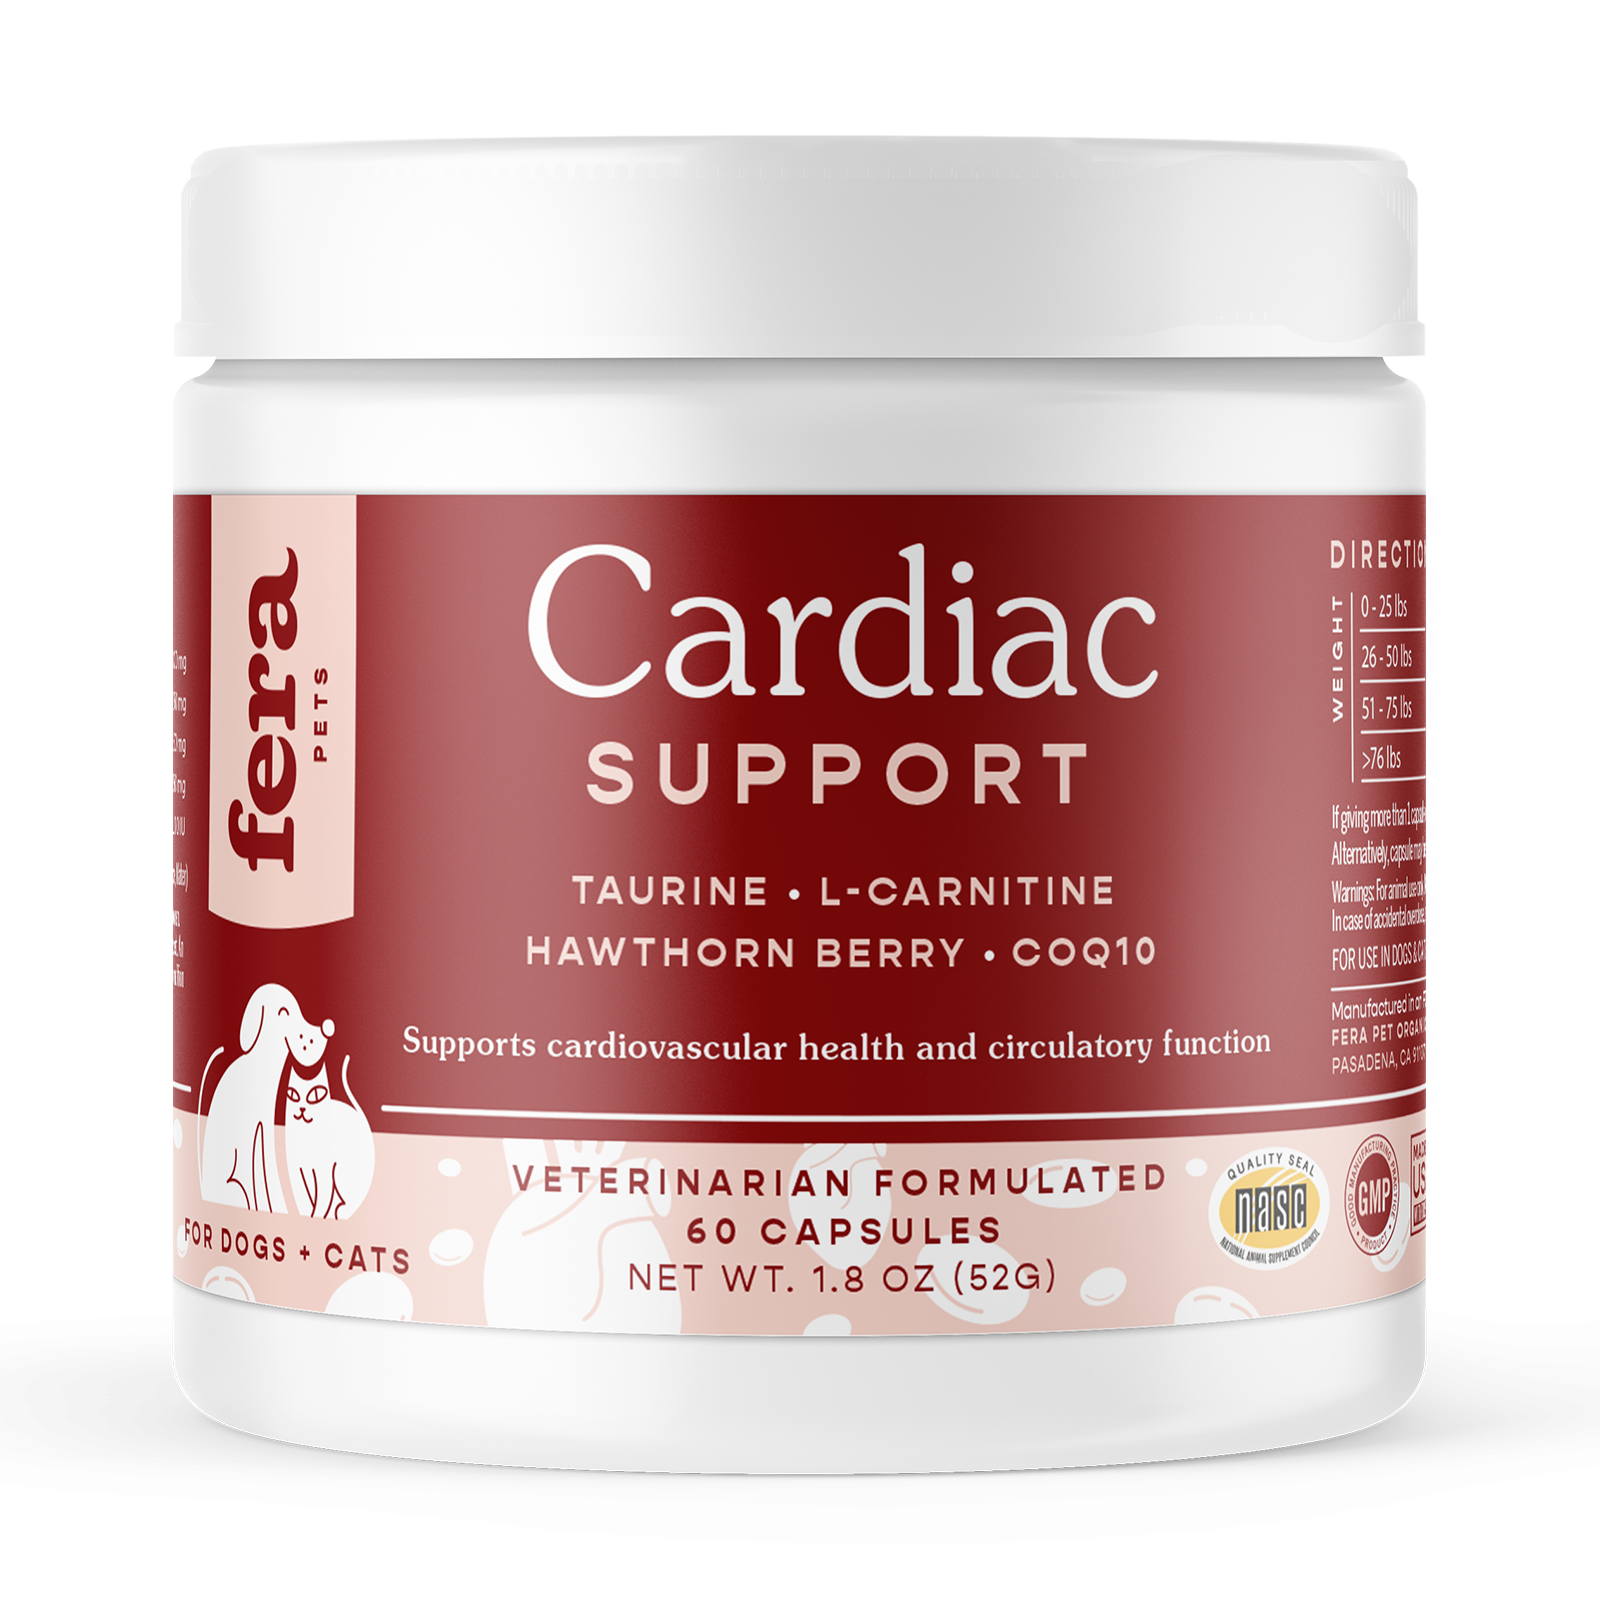 Cardiac Support for Dogs and Cats